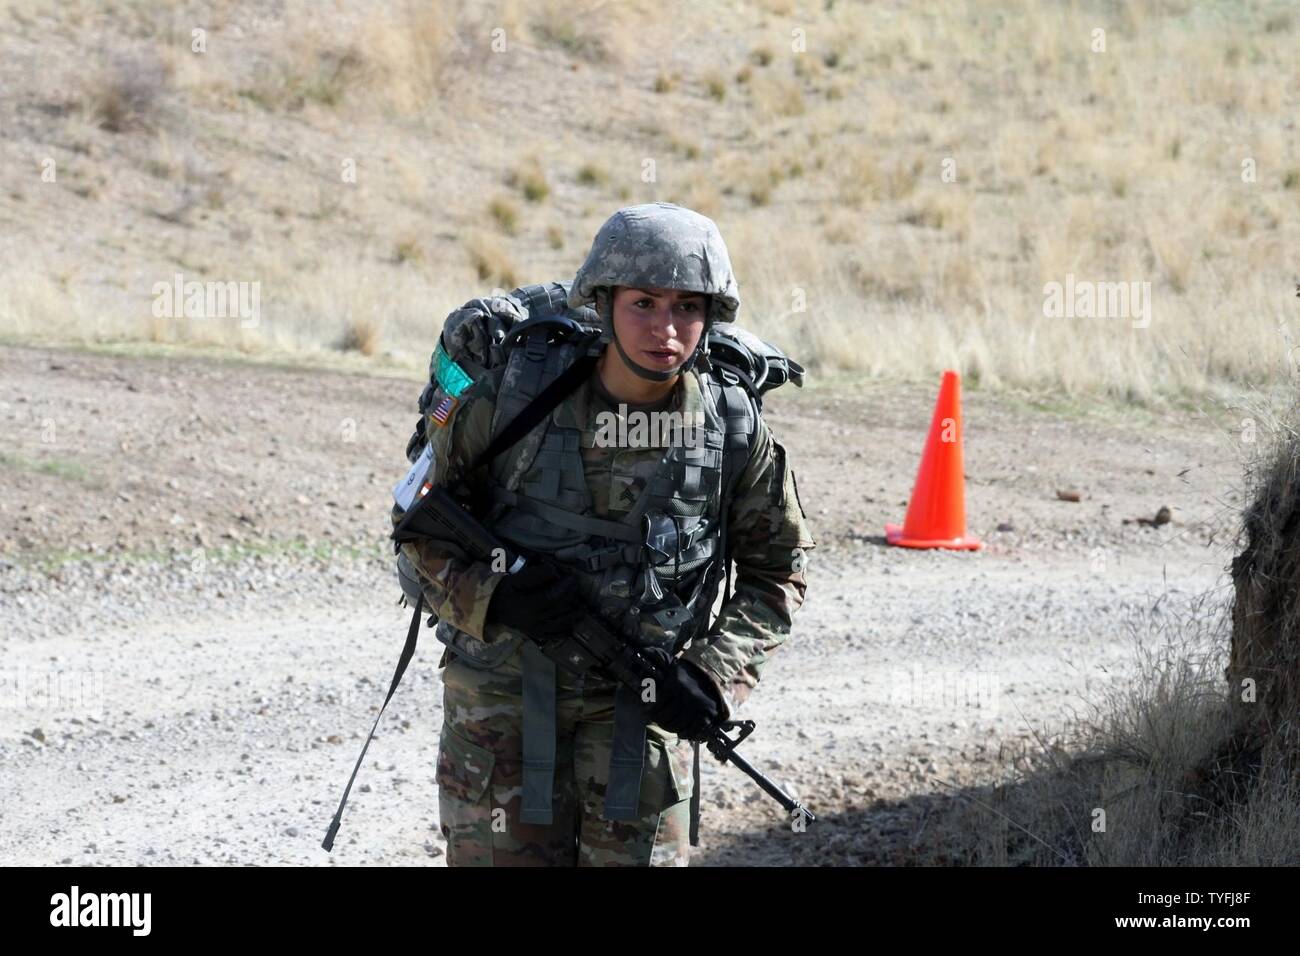 Sgt. Natalie Aquino, 870th Military Police Company, 49th Military Police Brigade, California Army National Guard, carries a 35-pound pack and closes on the 11-mile Ruck Sack finish line during California’s 2017 Best Warrior Competition Nov. 1-5, 2016, at Camp San Luis Obispo, San Luis Obispo, California. Stock Photo